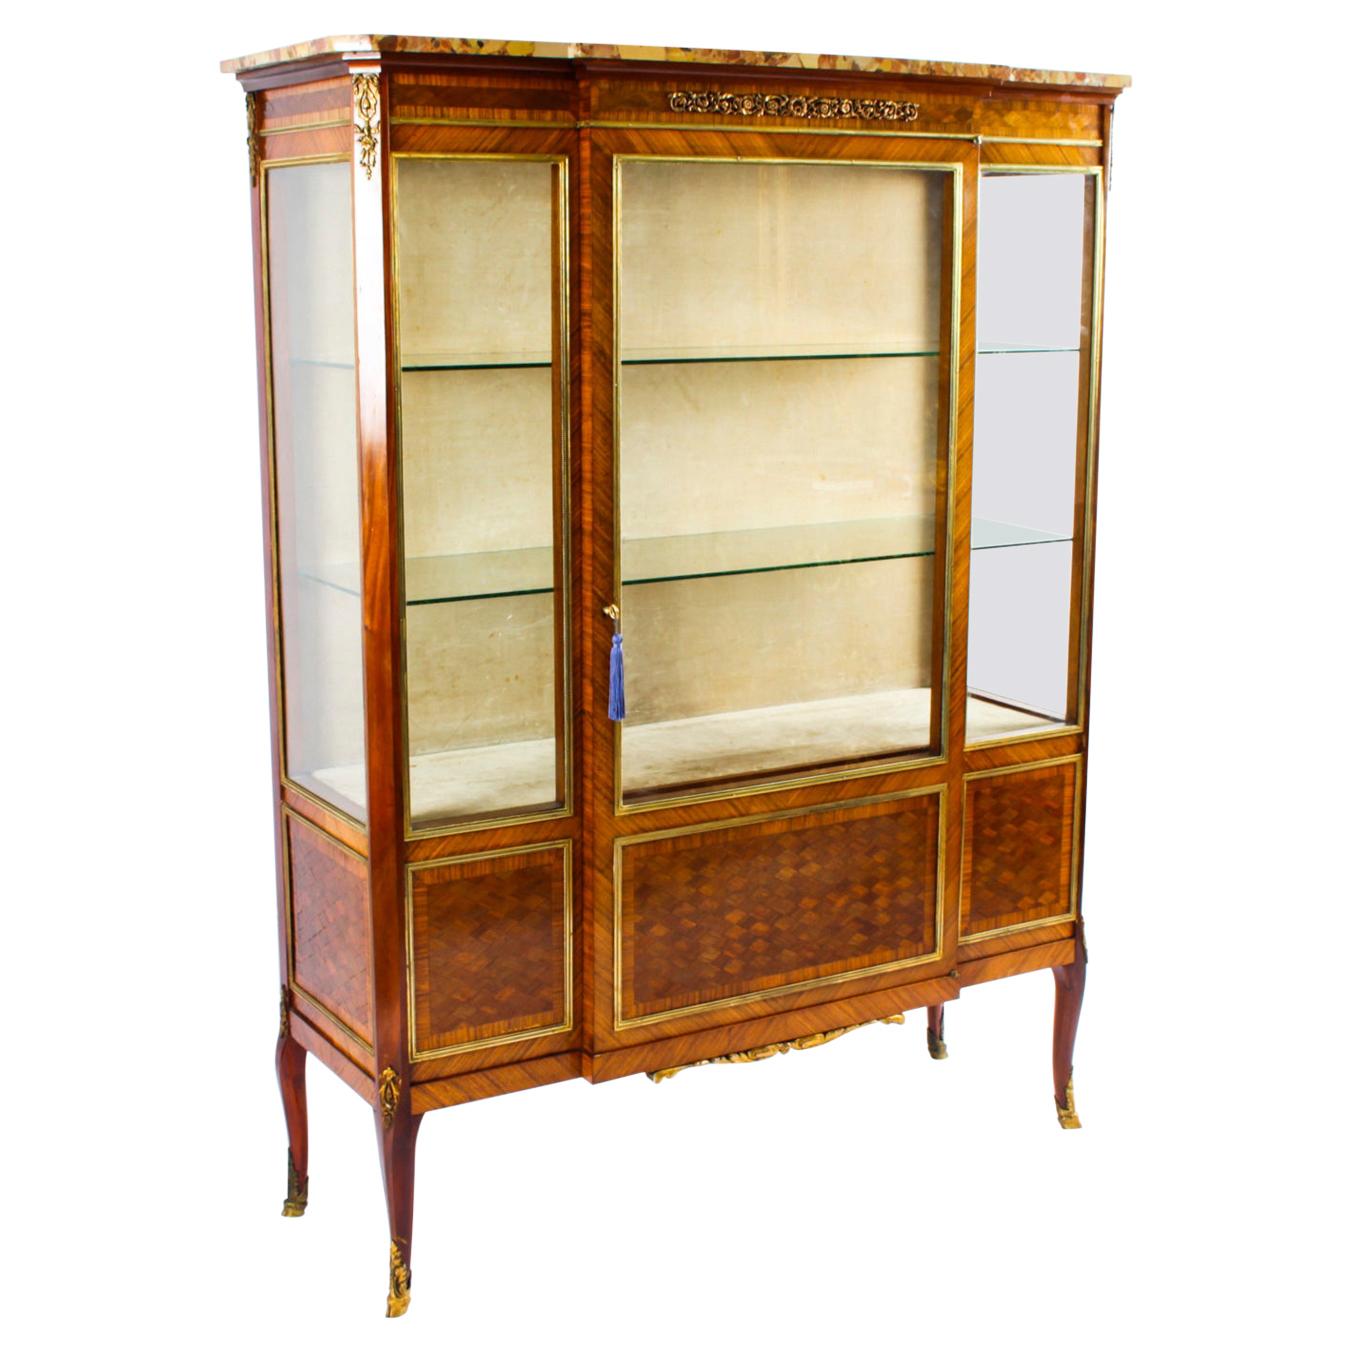 Antique French Parquetry Ormolu Mounted Vitrine Cabinet 19th C For Sale